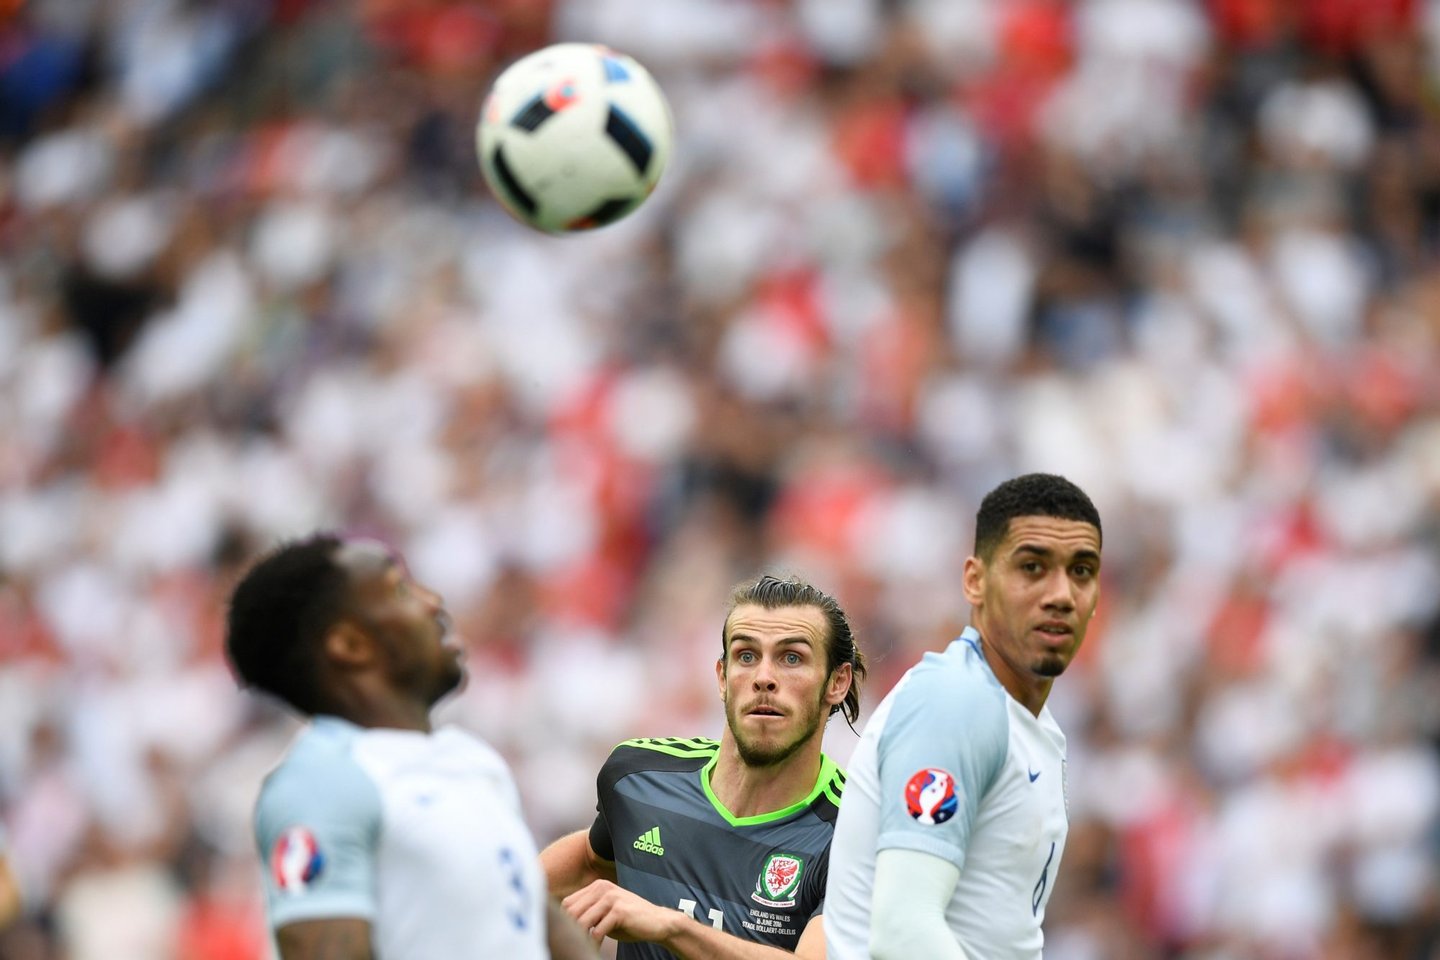 Wales' forward Gareth Bale (C) vies for the ball with England's defender Chris Smalling (R) and England's defender Danny Rose during the Euro 2016 group B football match between England and Wales at the Bollaert-Delelis stadium in Lens on June 16, 2016. / AFP / MARTIN BUREAU (Photo credit should read MARTIN BUREAU/AFP/Getty Images)